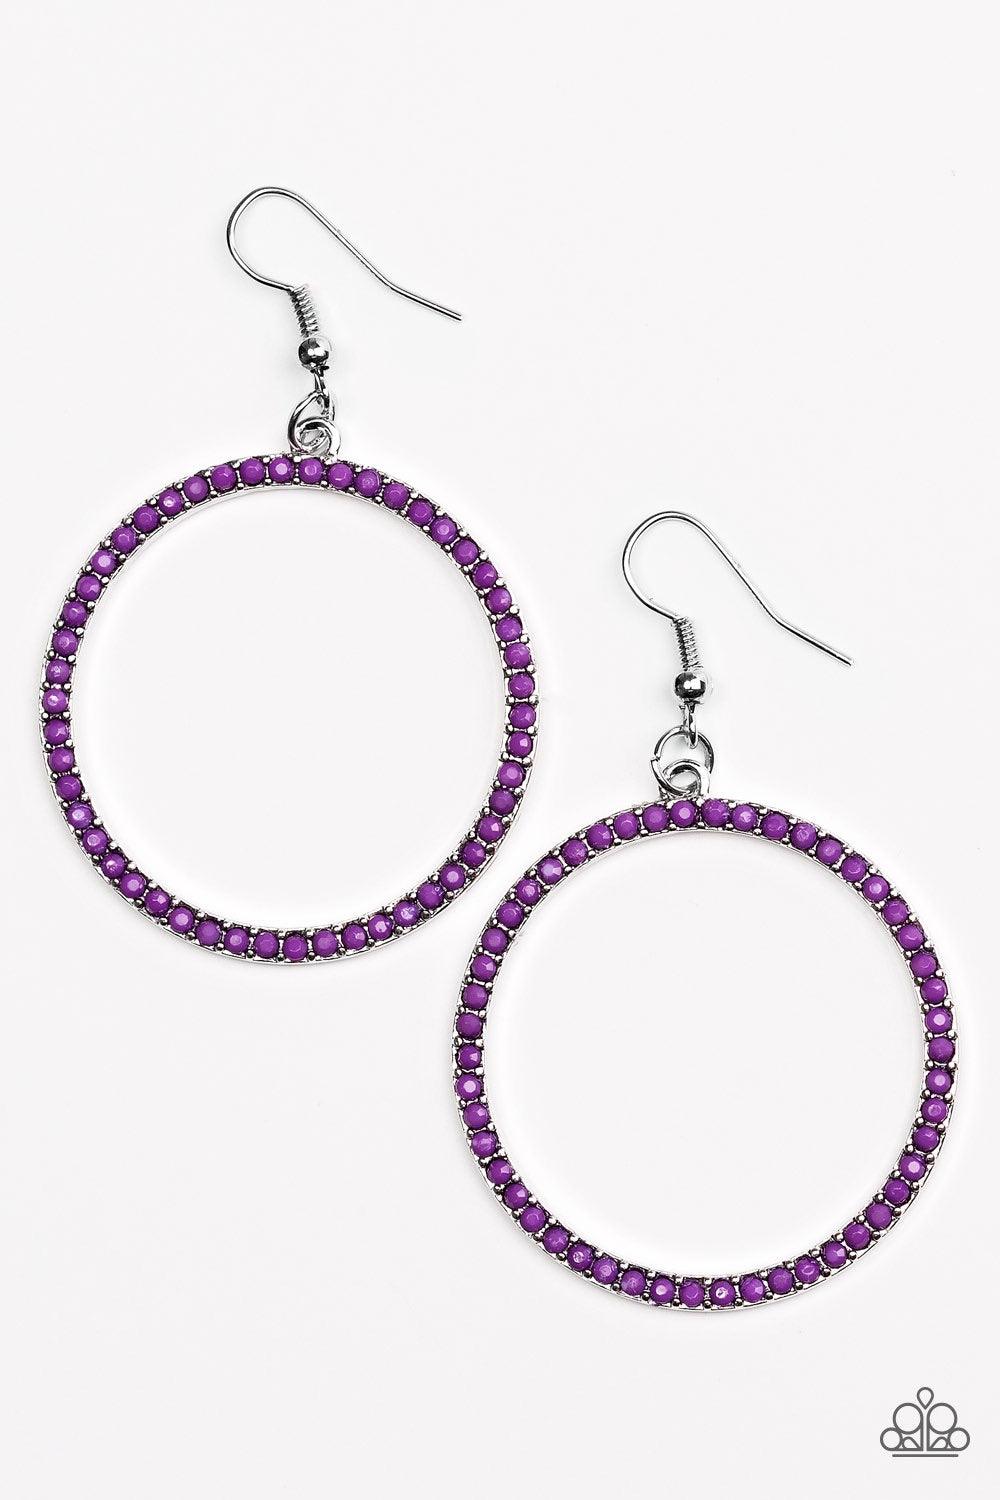 Paparazzi Accessories Spring Party - Purple Dainty purple beads are encrusted along a shimmery silver hoop for a perfect pop of seasonal color. Earring attaches to a standard fishhook fitting. Jewelry